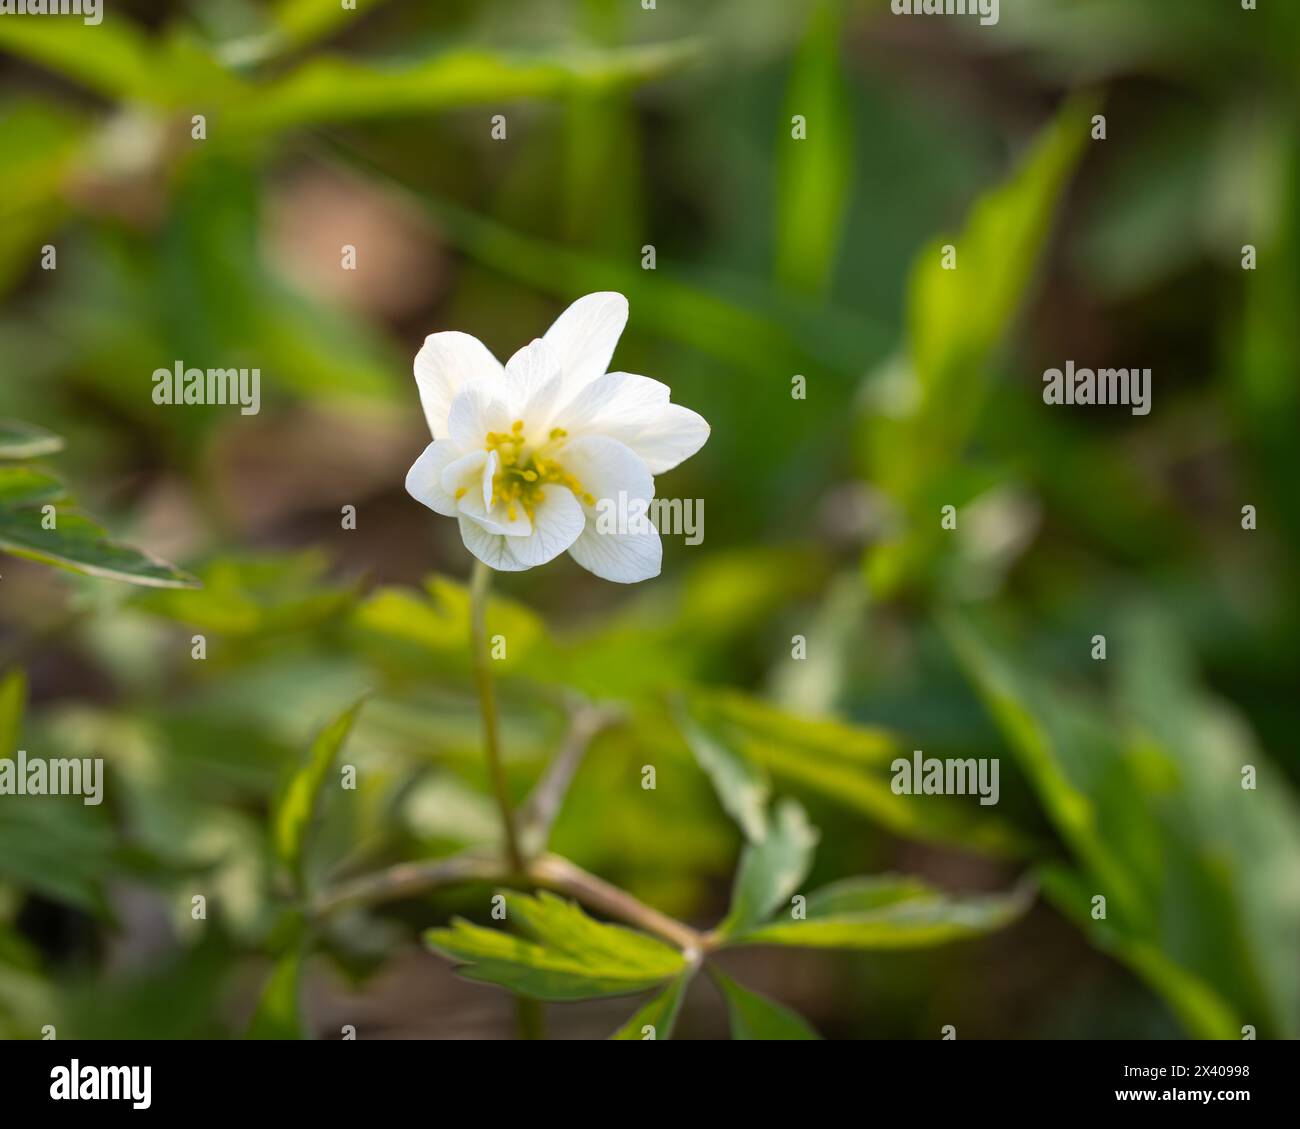 Early-spring flowering plant wood anemone (anemone nemorosa). Close up photo of  wood anemone (anemone nemorosa) flower in a forest. Bokeh background. Stock Photo